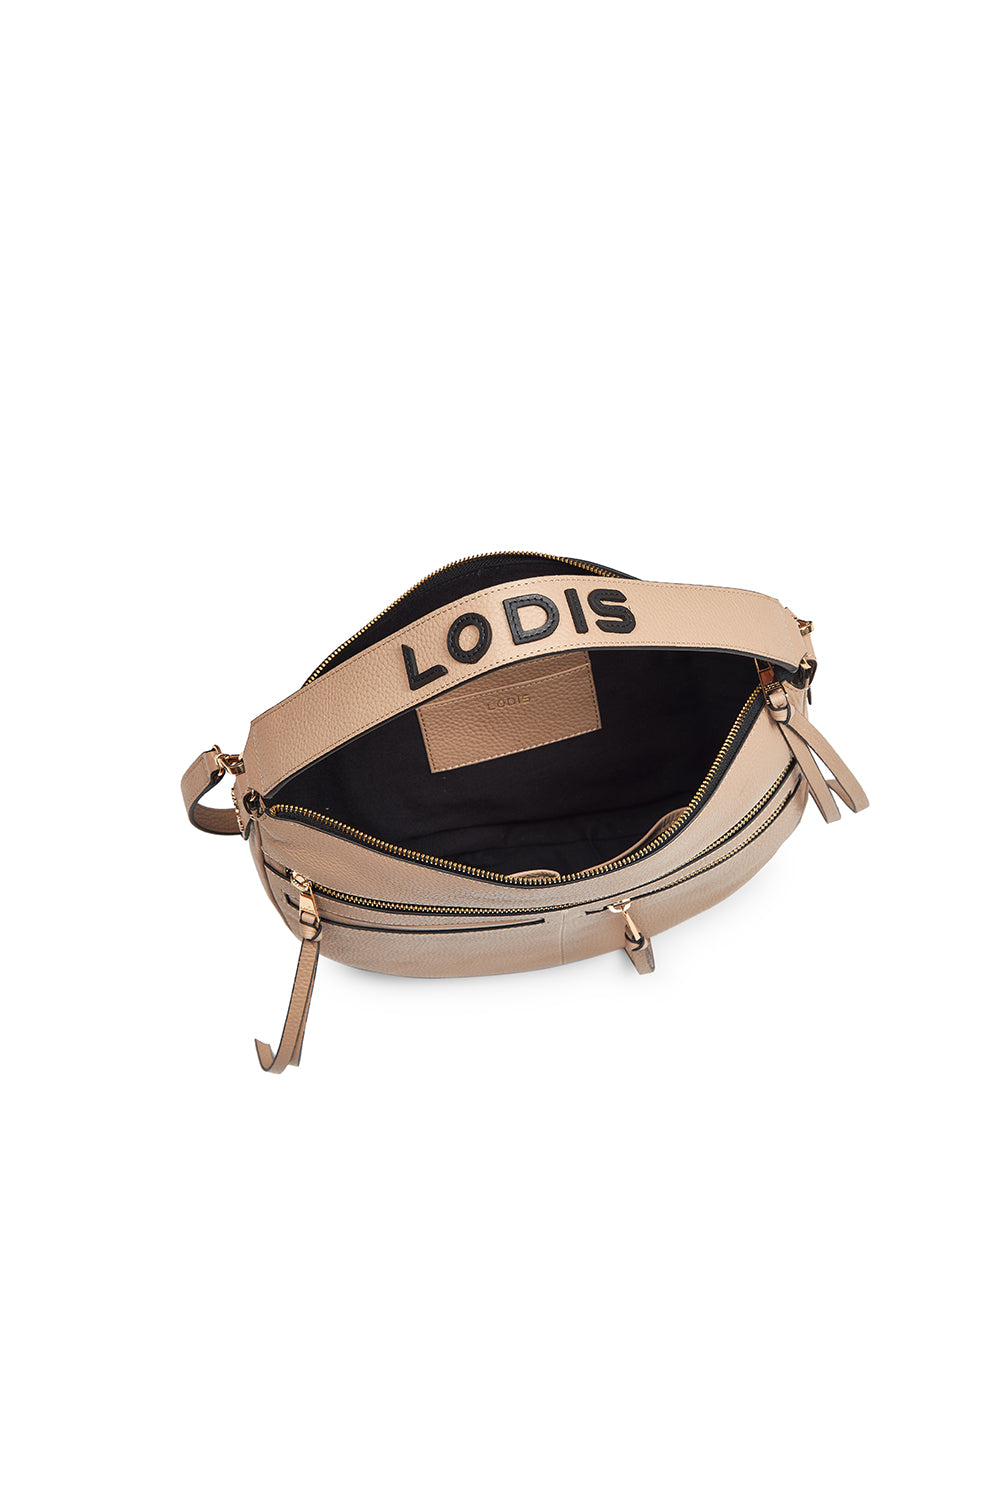 Buy now The Soft Pebble Leather Bag and Elevate Your Style with Lodis